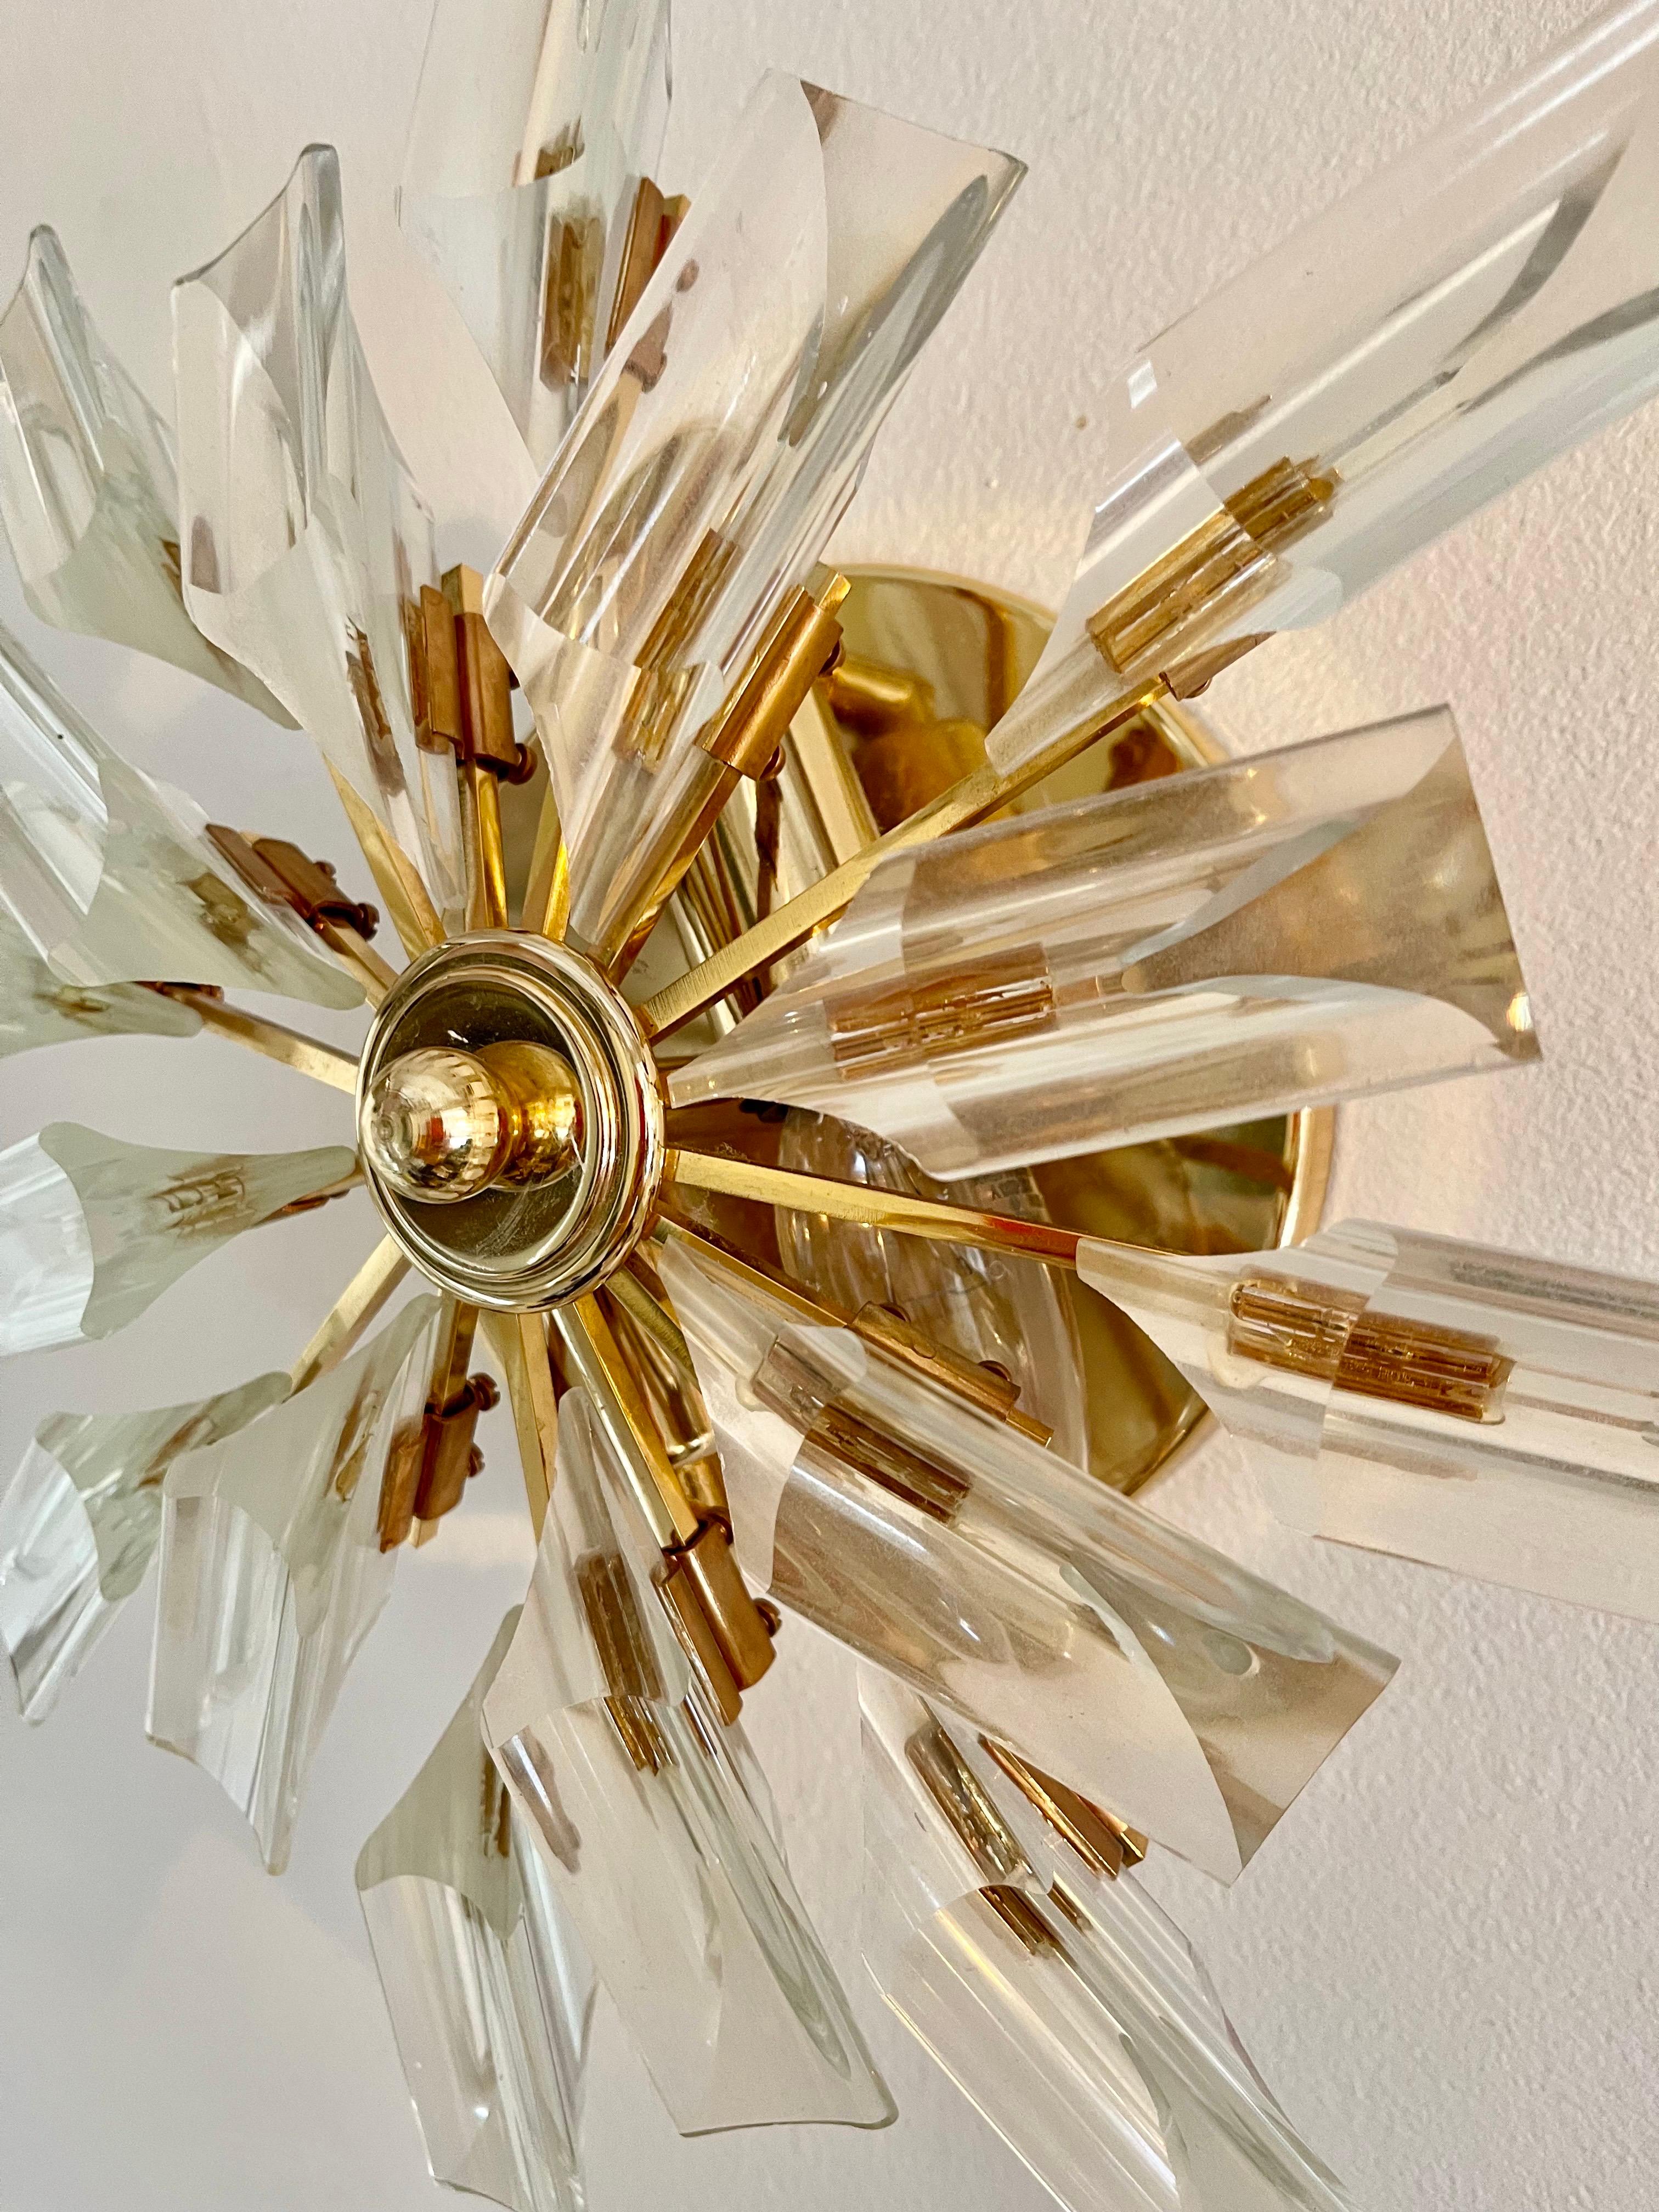 Venini wall lighting murano glass with in iridium glass. The design and the quality of the glass make this piece the best of the design.
This wall lighting pair are in good condition.

Venini is an Italian company that is known for its high-quality,